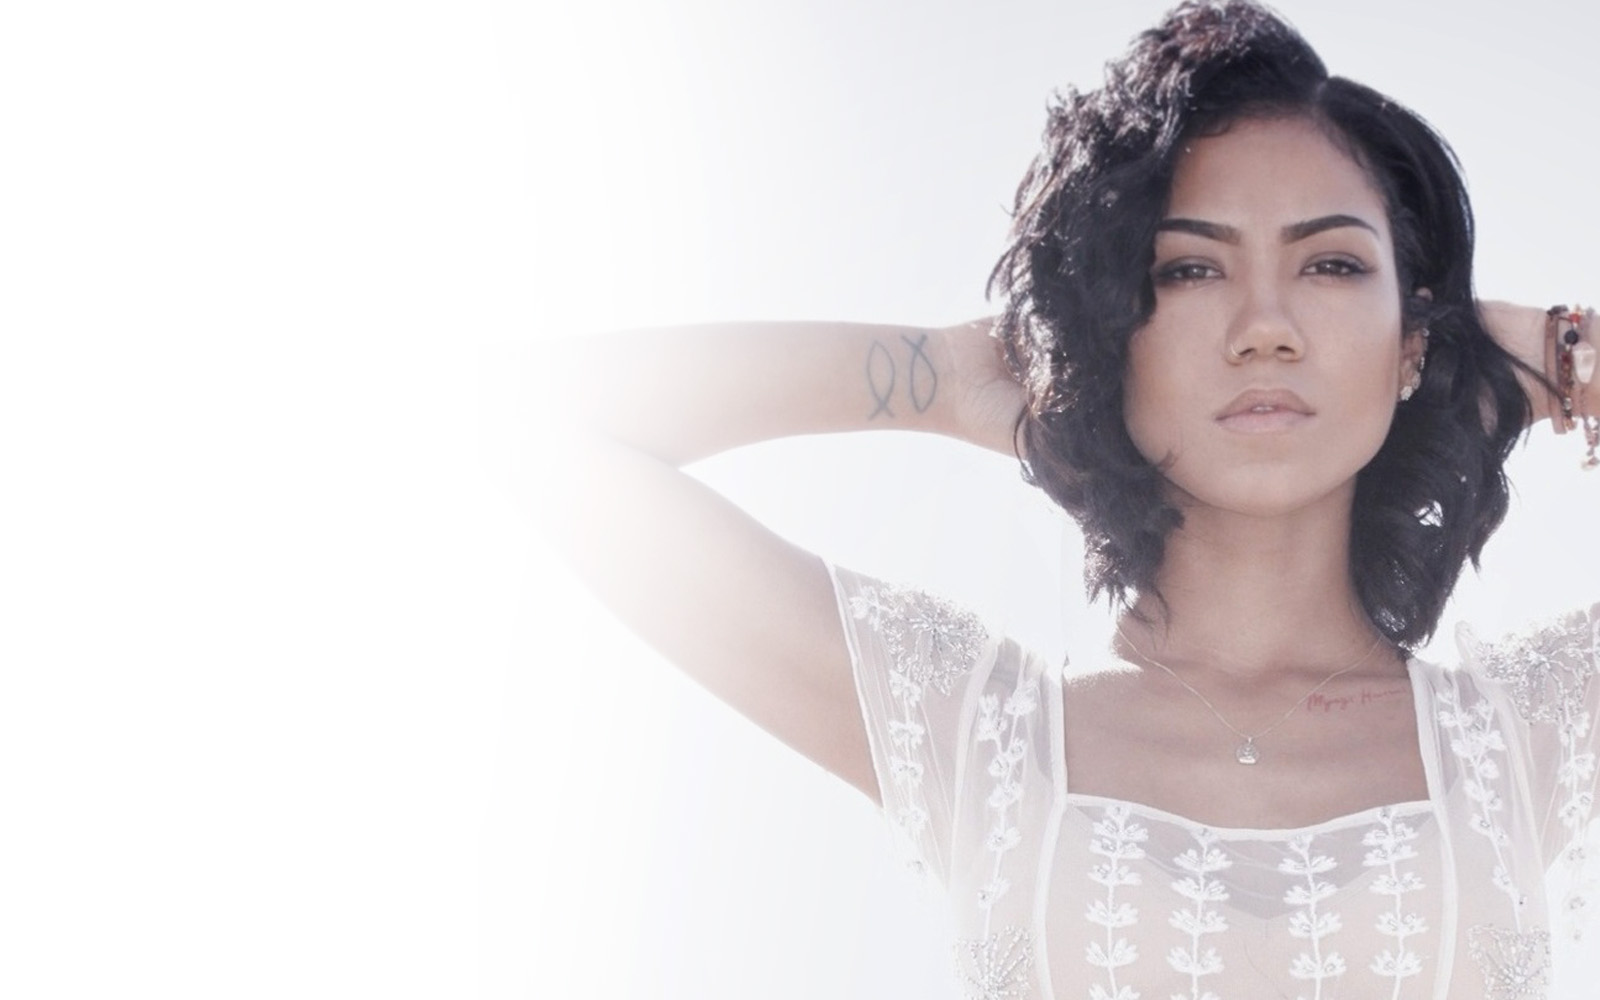 Buy Tickets to Jhene Aiko at supperthursdays in Los Angeles